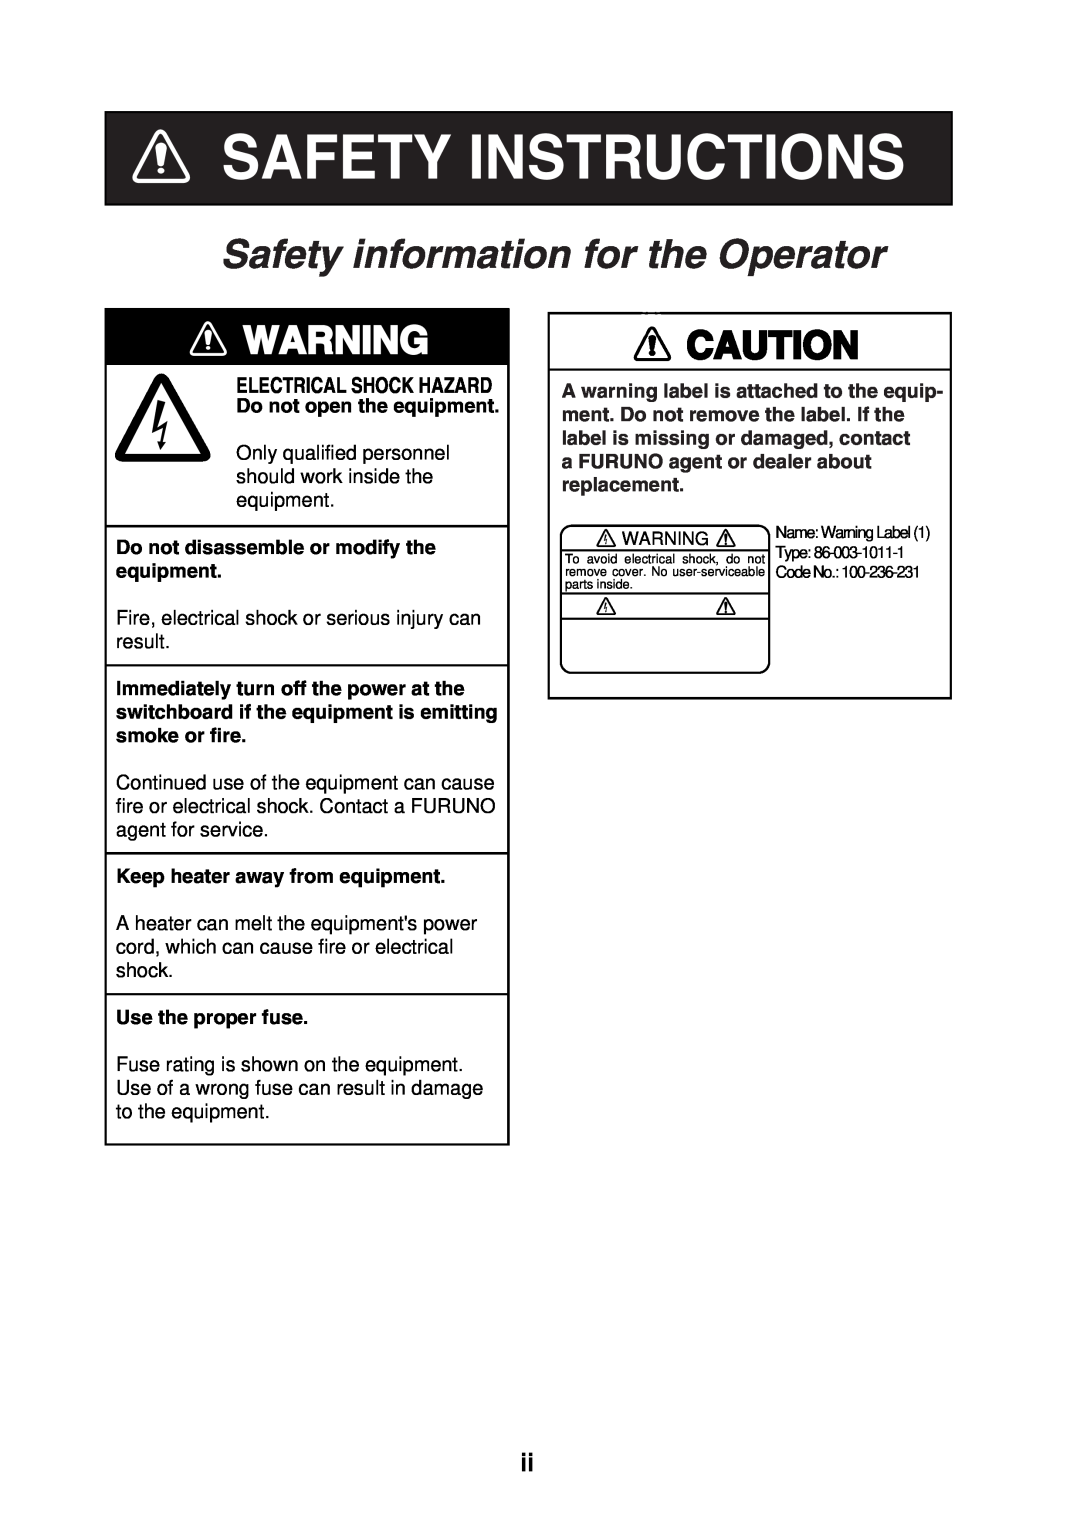 Furuno NX-700B Safety information for the Operator, Electrical Shock Hazard, Safety Instructions, Use the proper fuse 